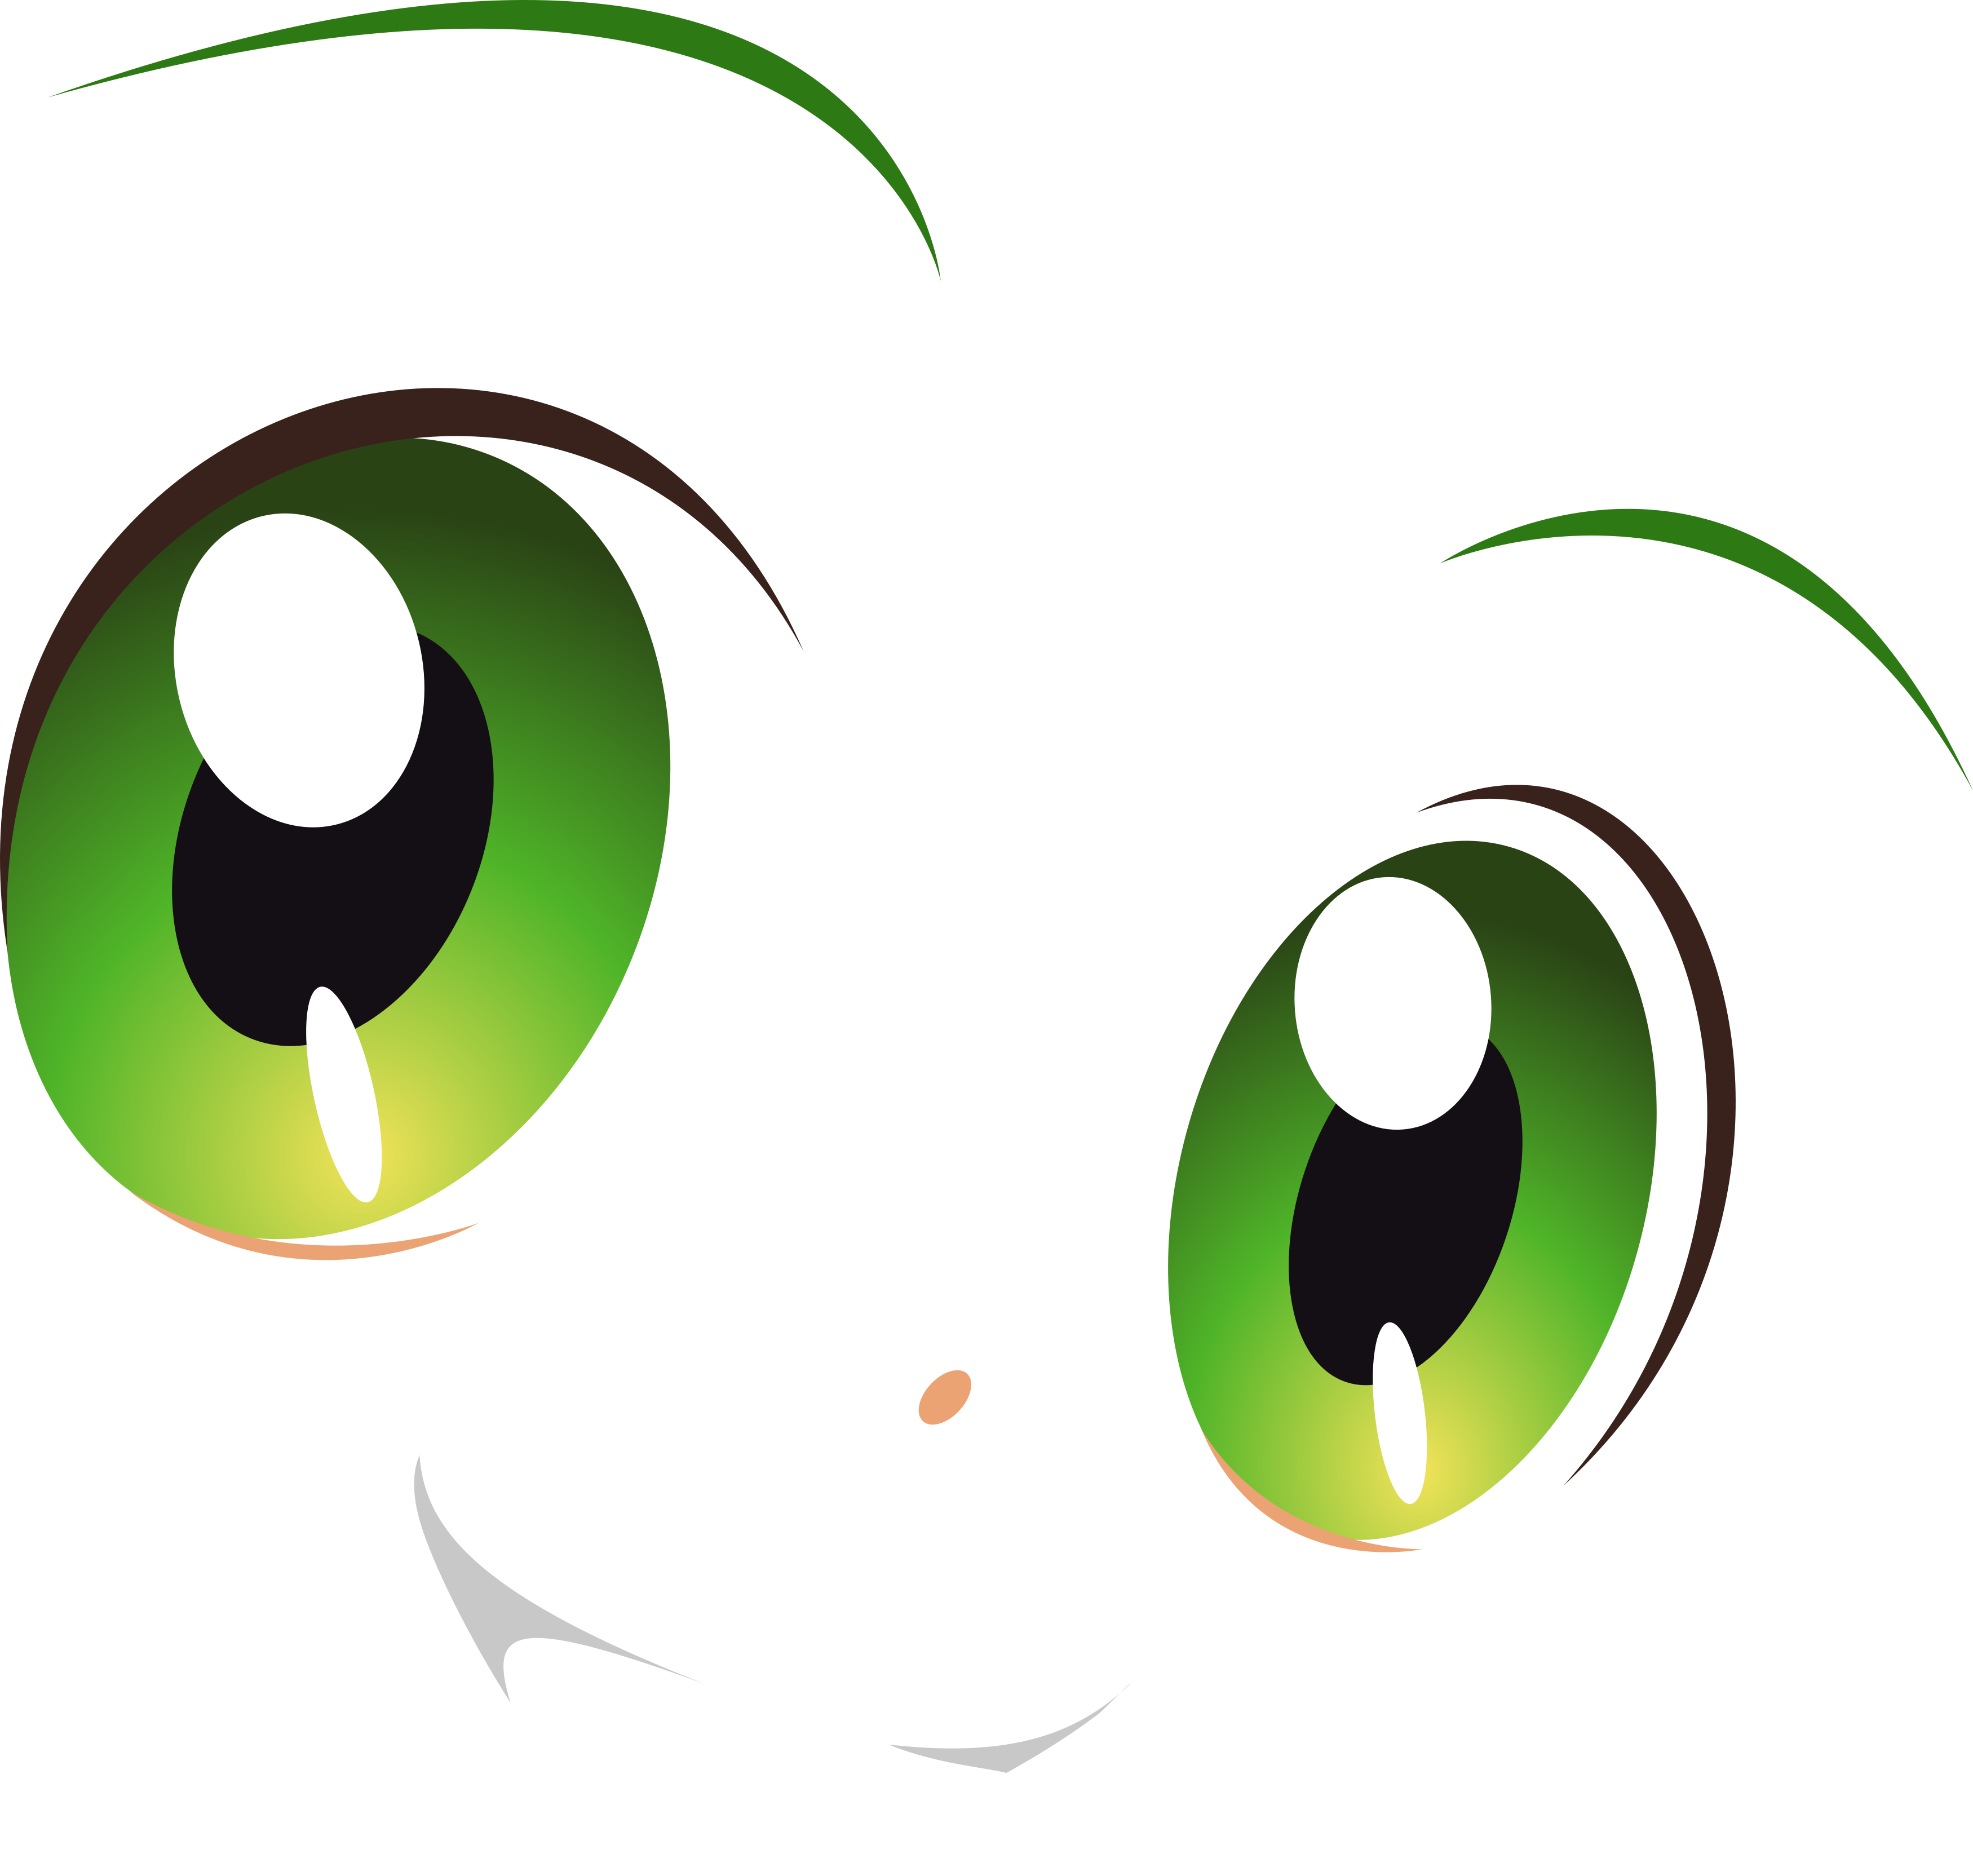 clipart smile green